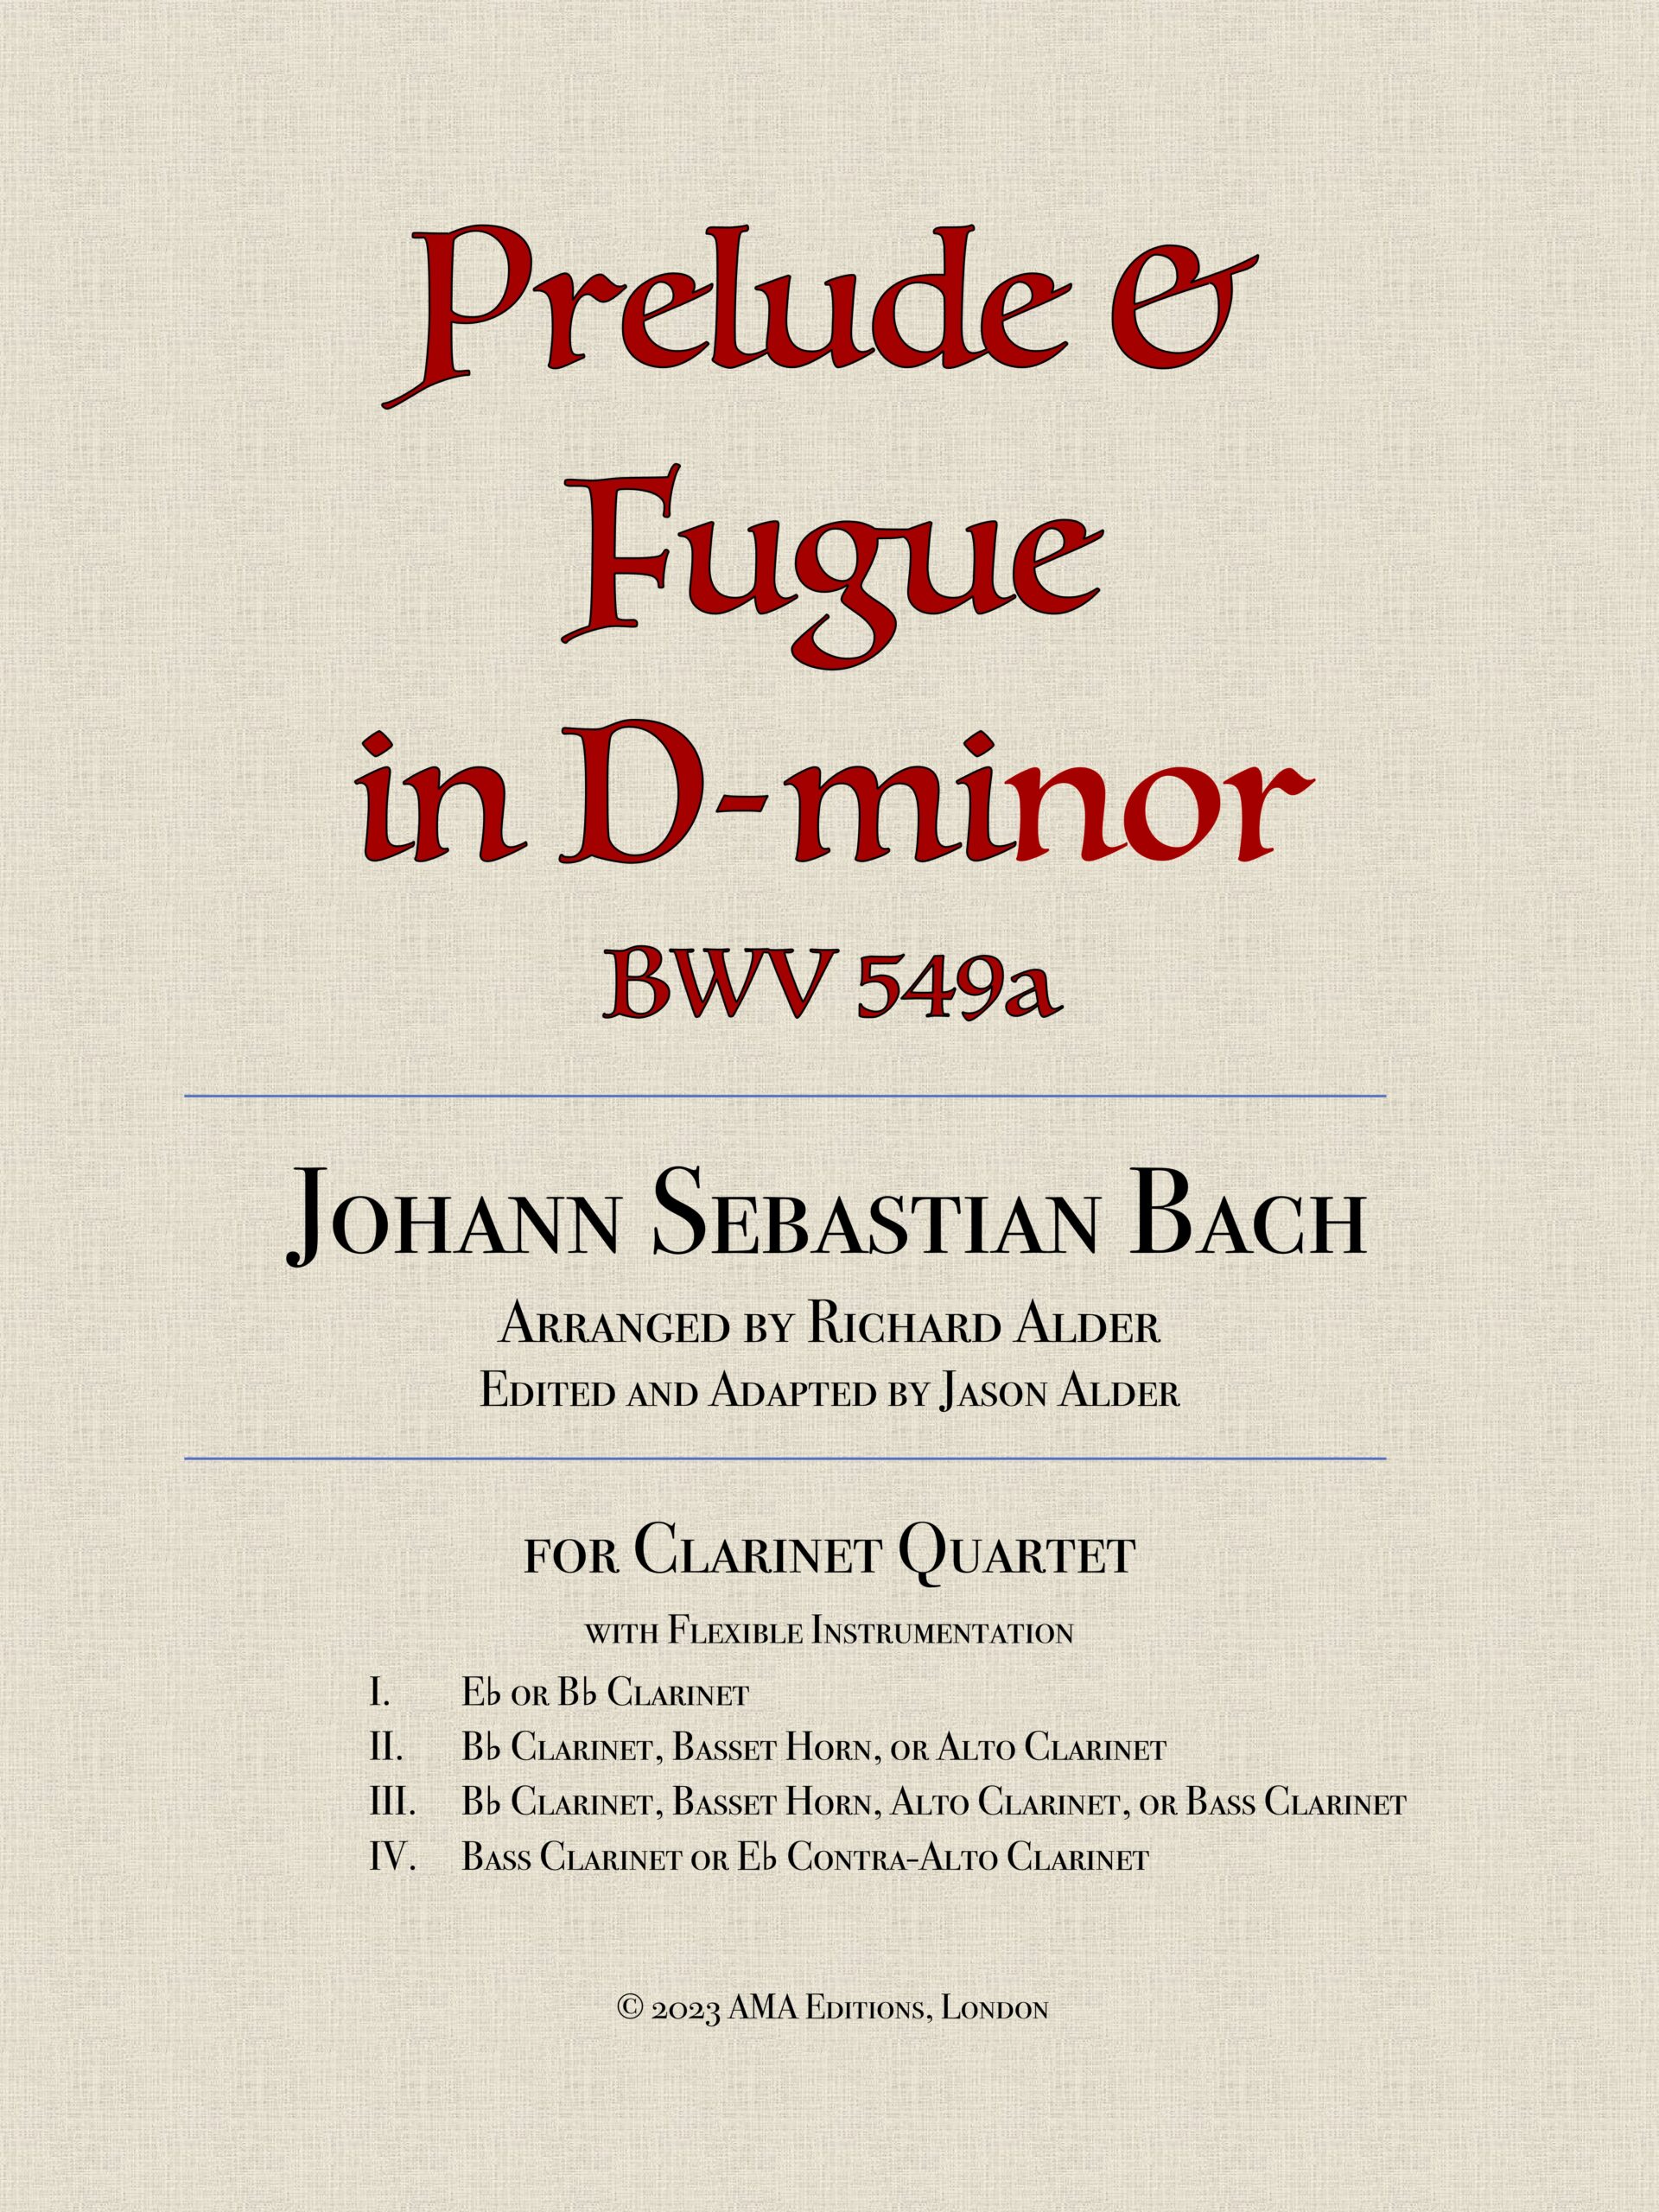 Bach Prelude and Fugue in D minor BWV 549a Richard Alder clarinet quartet scaled